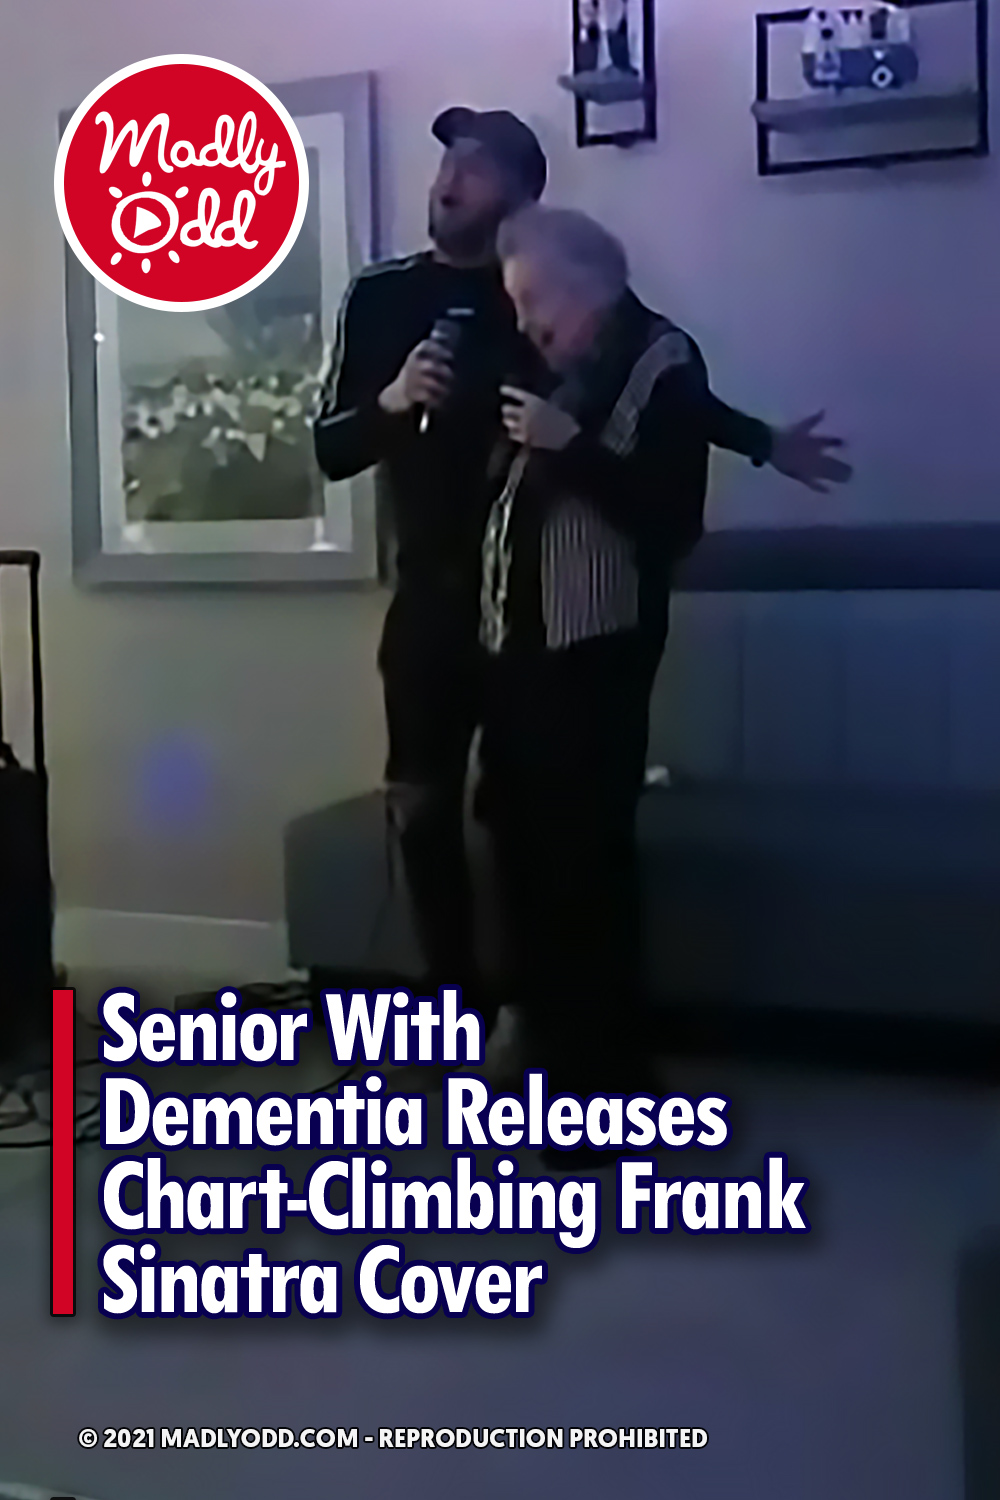 Senior With Dementia Releases Chart-Climbing Frank Sinatra Cover